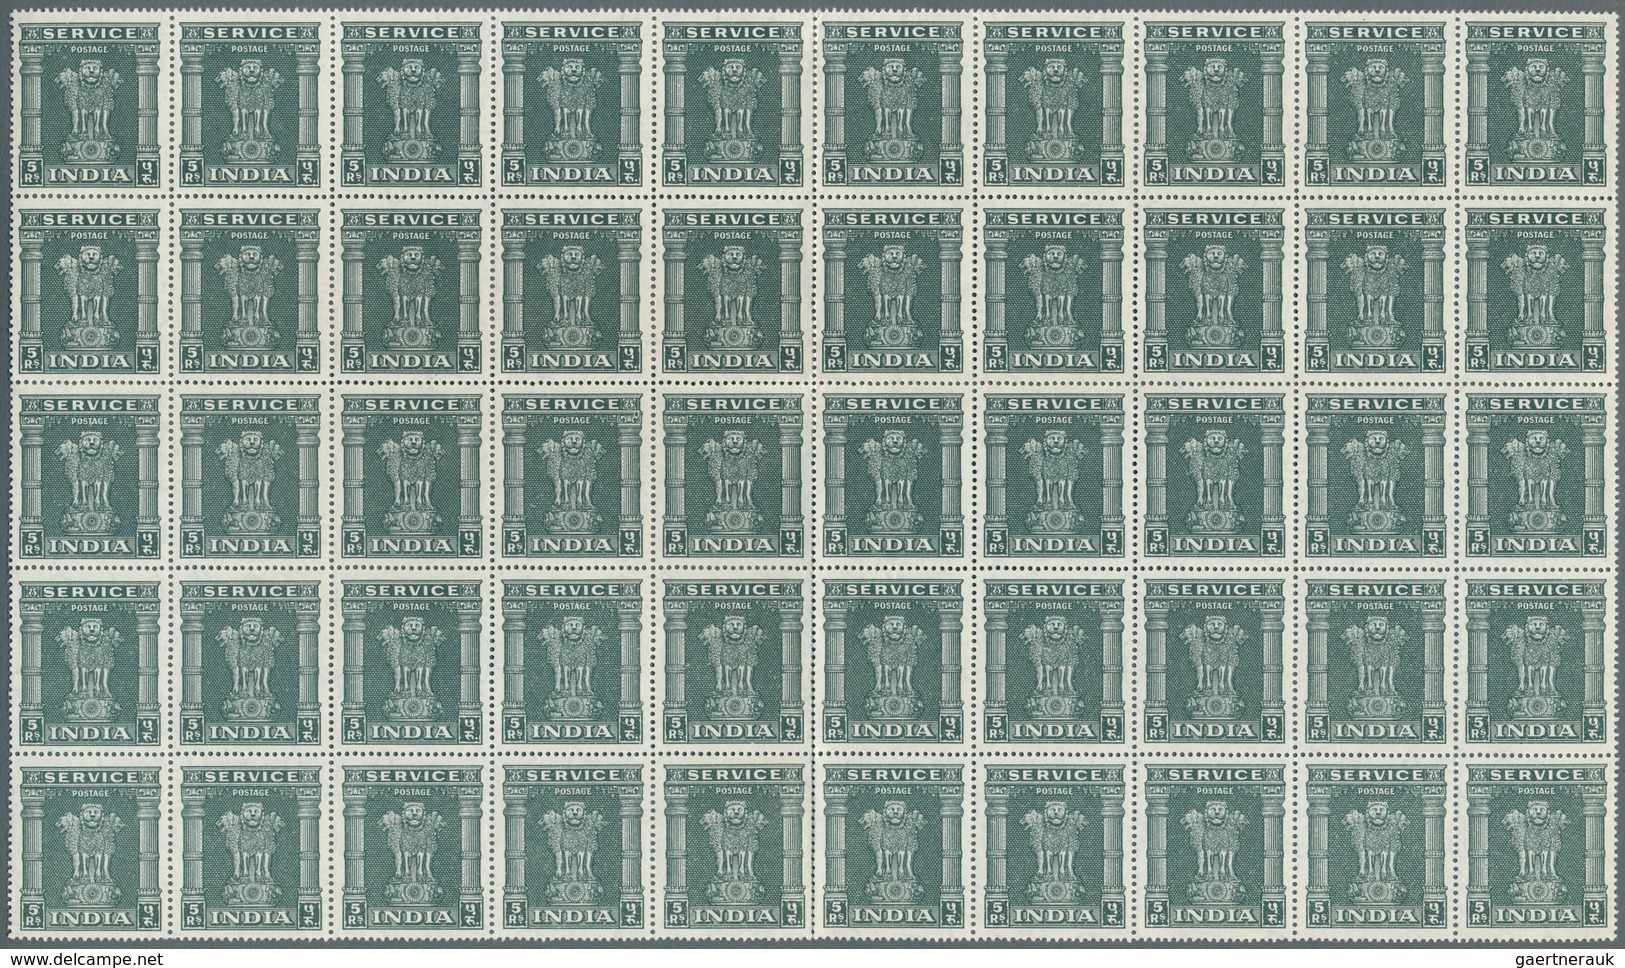 08752 Indien - Dienstmarken: 1950, 2, 5 and 10 Rupies, sheetparts with totally 200 of each value, mnh, CV